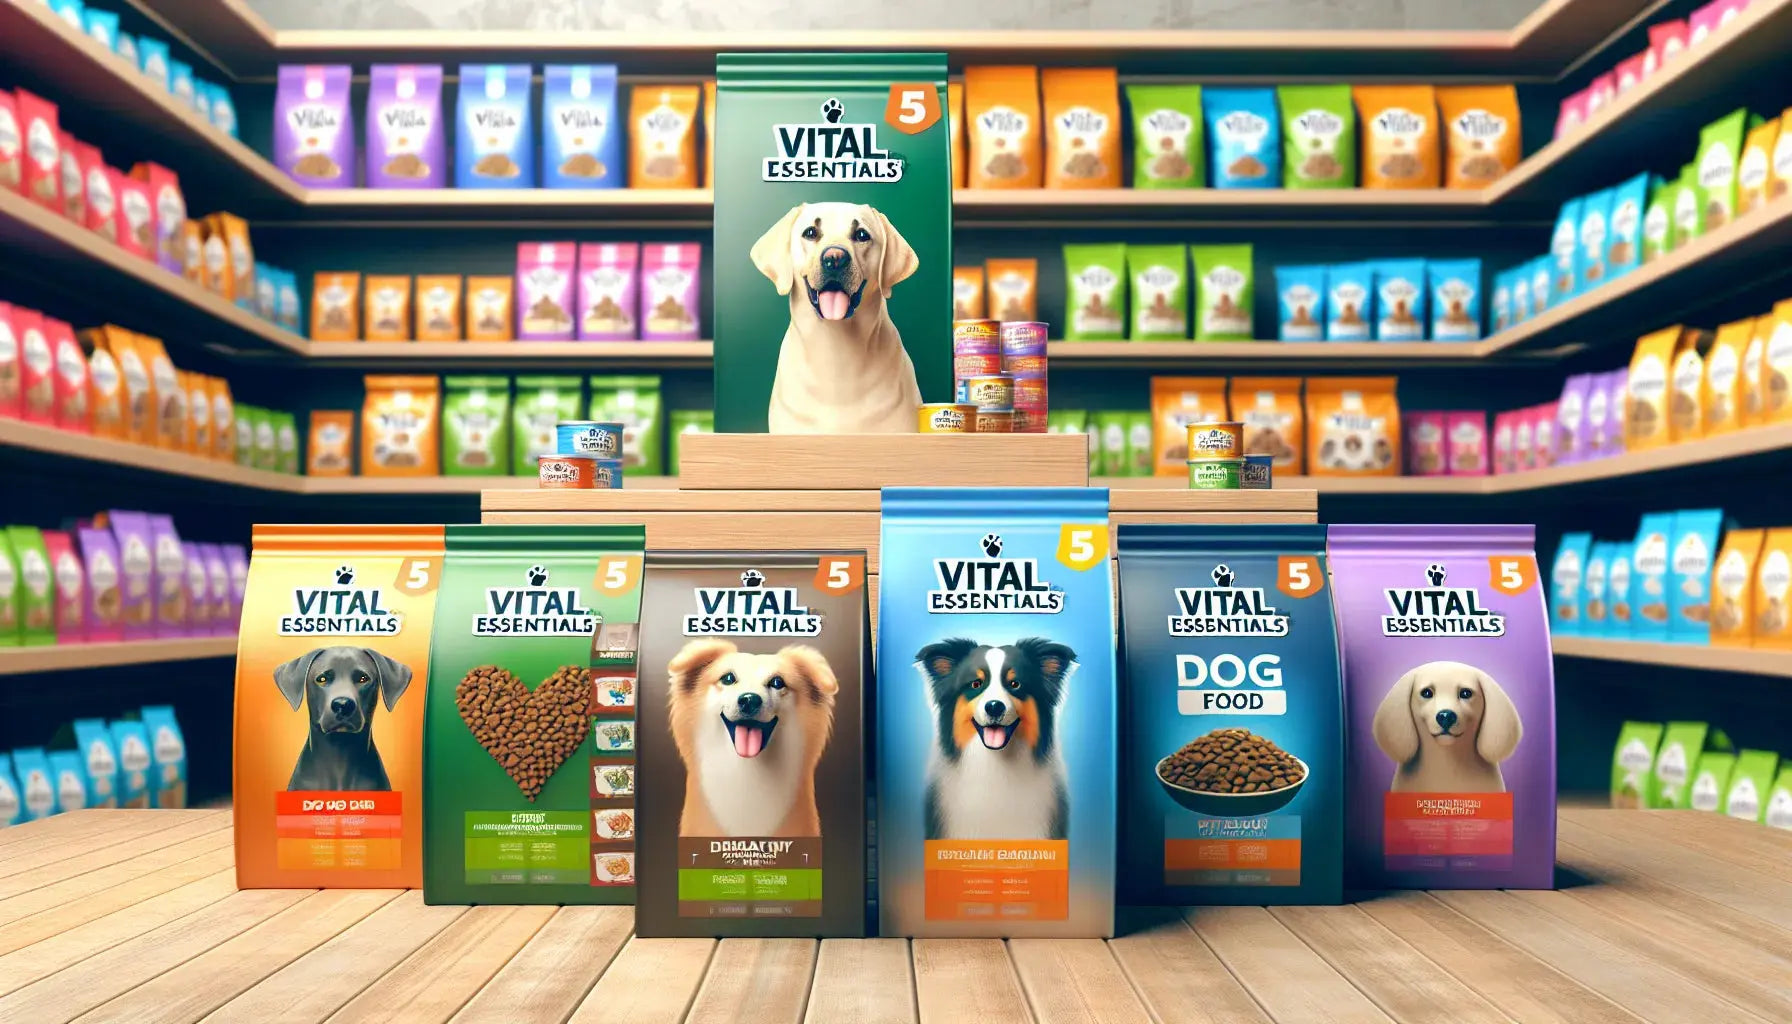 Top 5 Vital Essentials Dog Food Options for a Healthy Diet